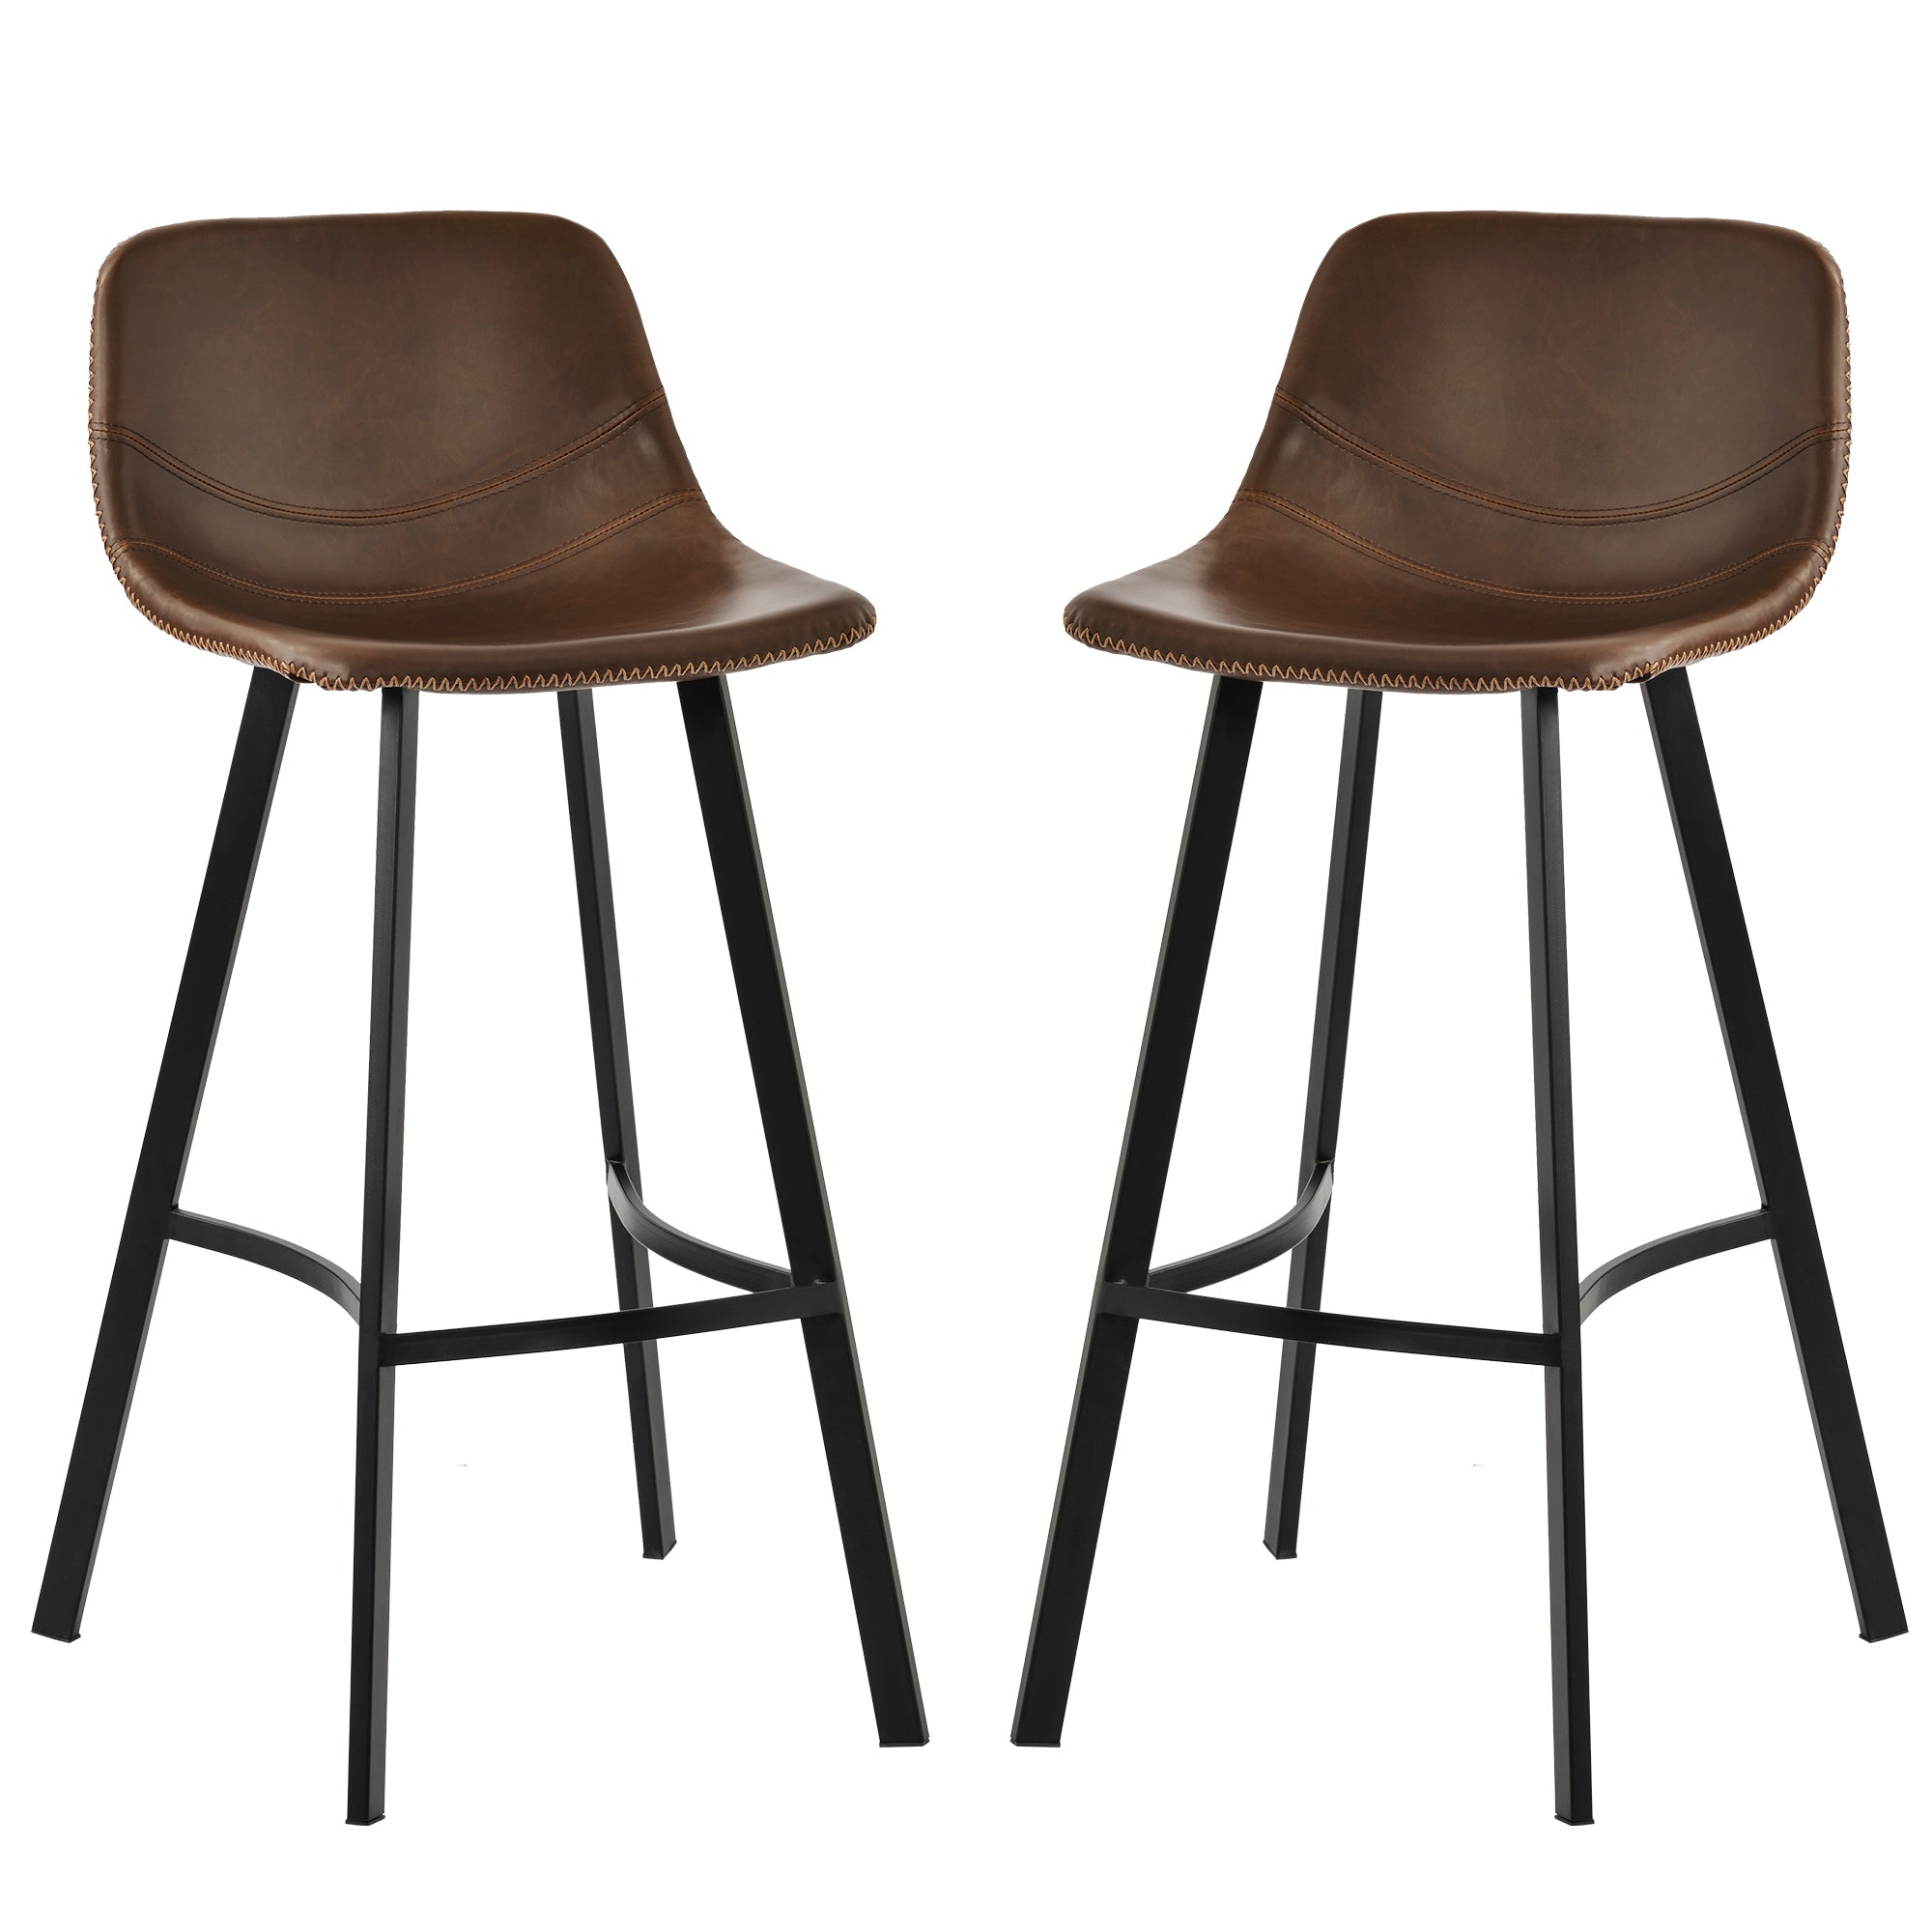 Low Back Footrest Vintage Leatherier Height Bar Stools Dining Chairs Set of 2-Boyel Living